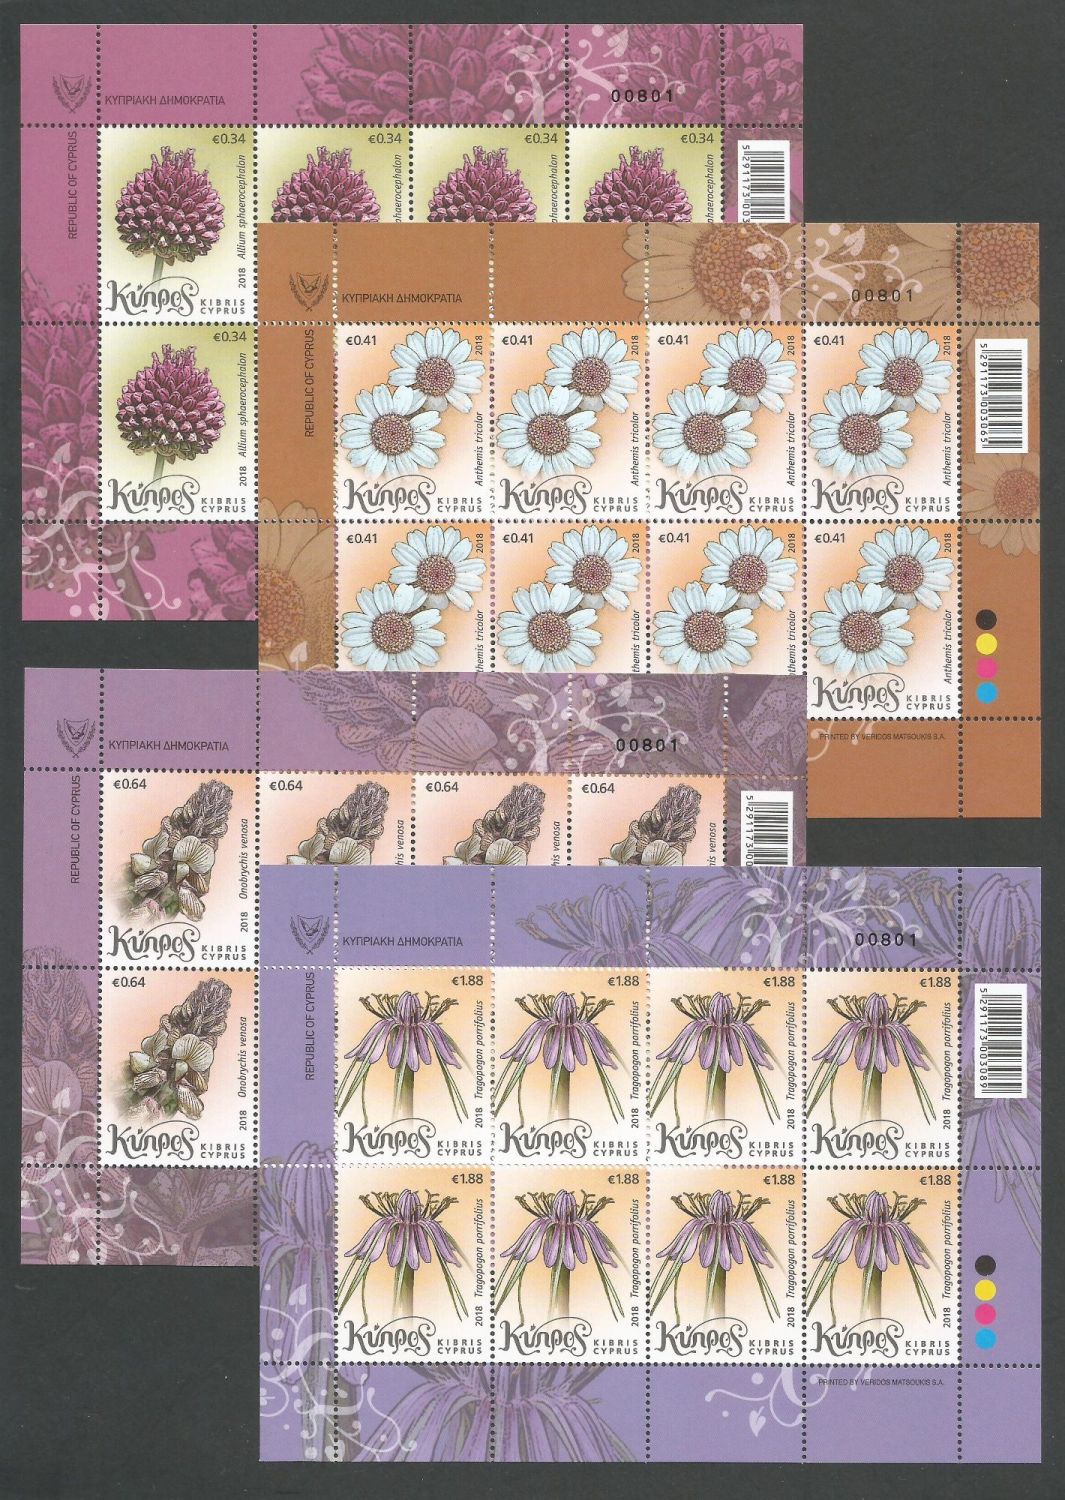 Cyprus Stamps SG 2018 (a) Wild flowers of Cyprus - Full sheets MINT